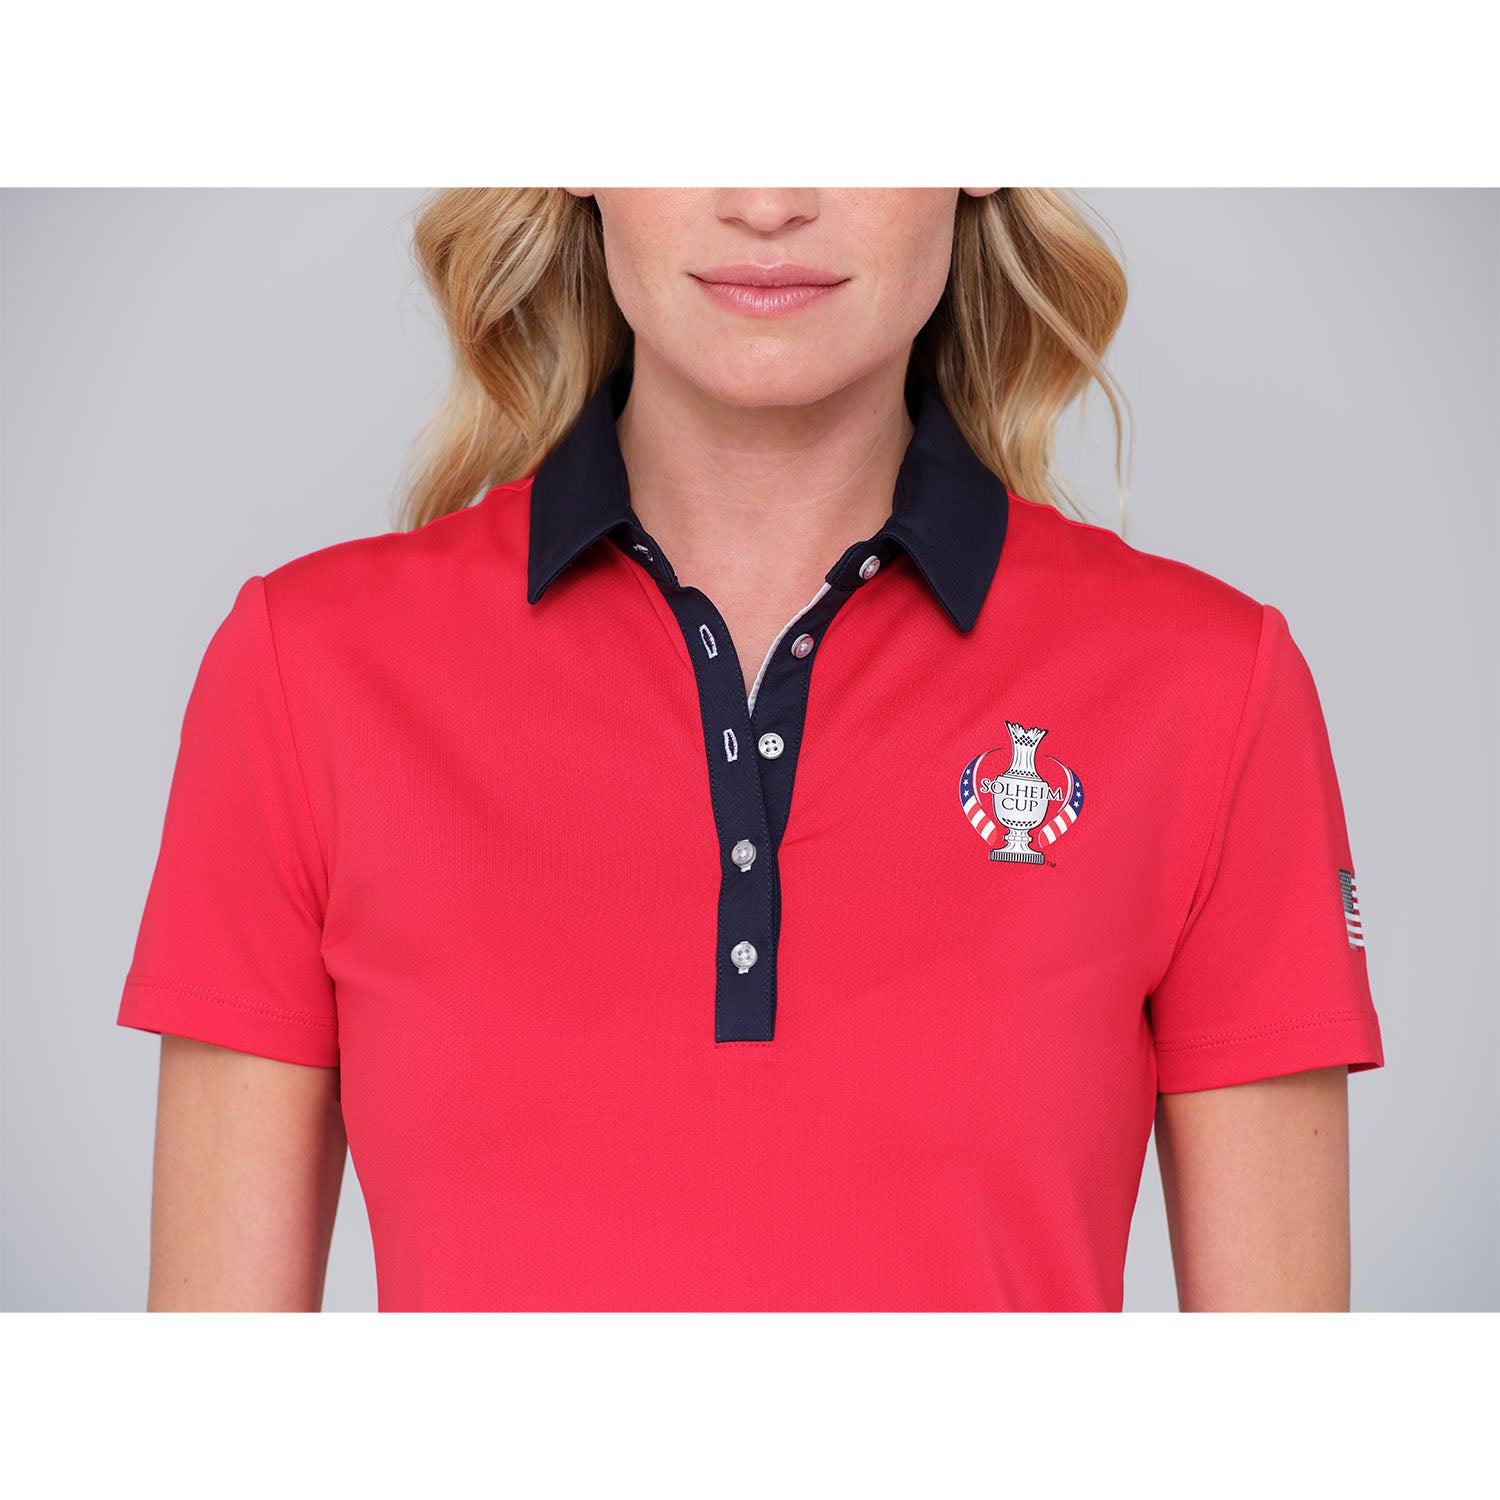 Dunning 2023 LPGA Official Solheim Cup Team Uniform Women's Short Sleeve Performance Polo in Glory / Halo - Lifestyle Zoomed in Front View